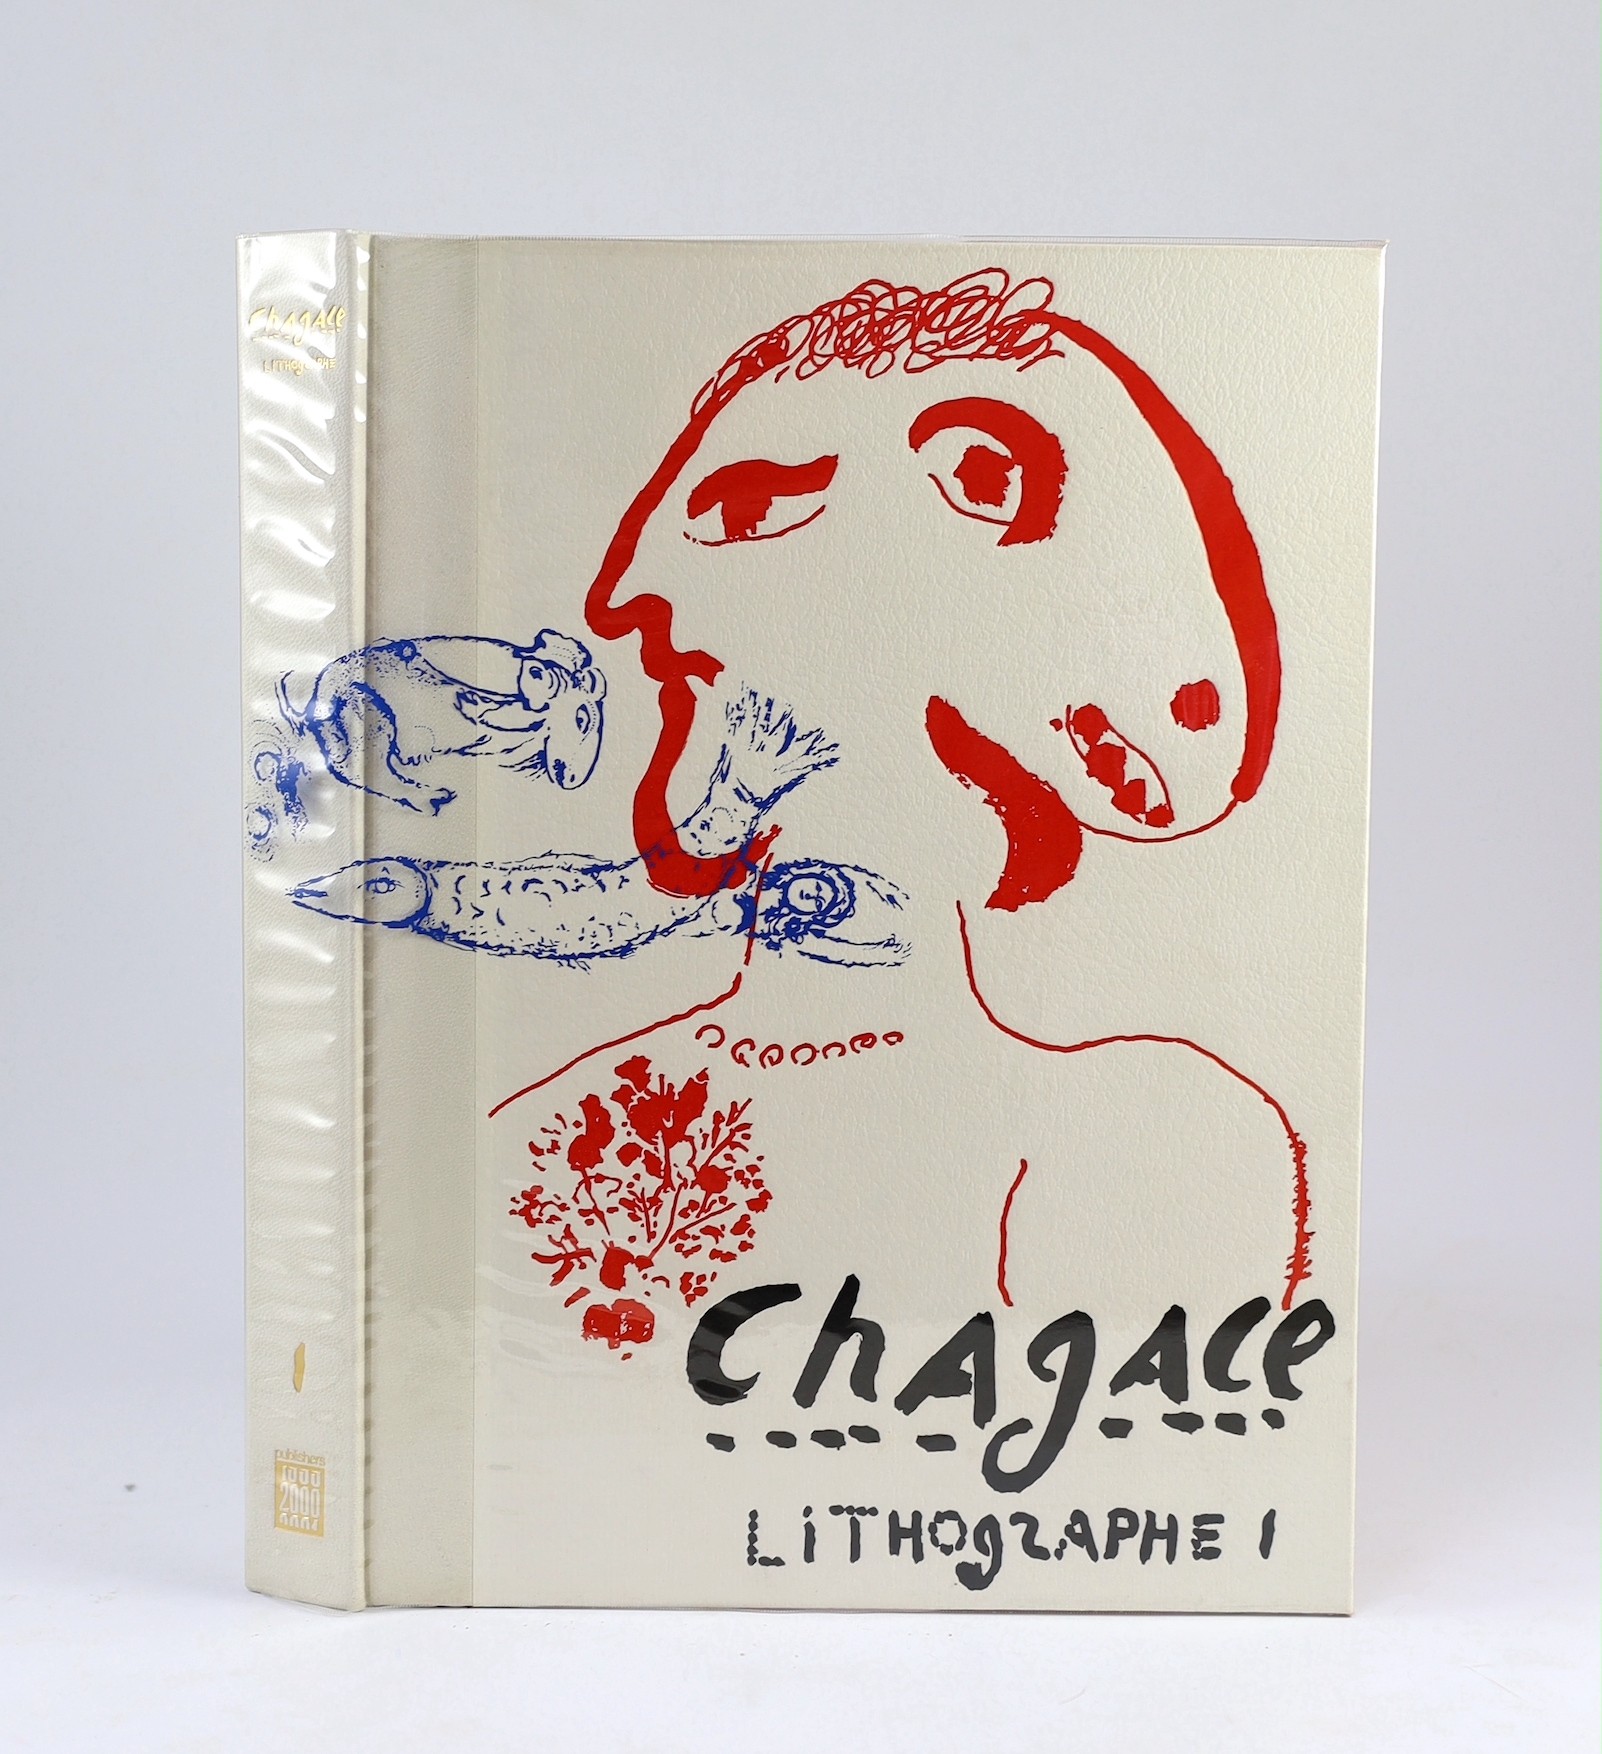 Chagall, Marc - Chagall Lithographie, [catalogue raisonne], 5 vols, number 326 of 1000, folio, white pebble-grained faux leather, Japanese edition, text in Japanese and French, Publishers 2000 Inc, Tokyo, 1978, in slip c